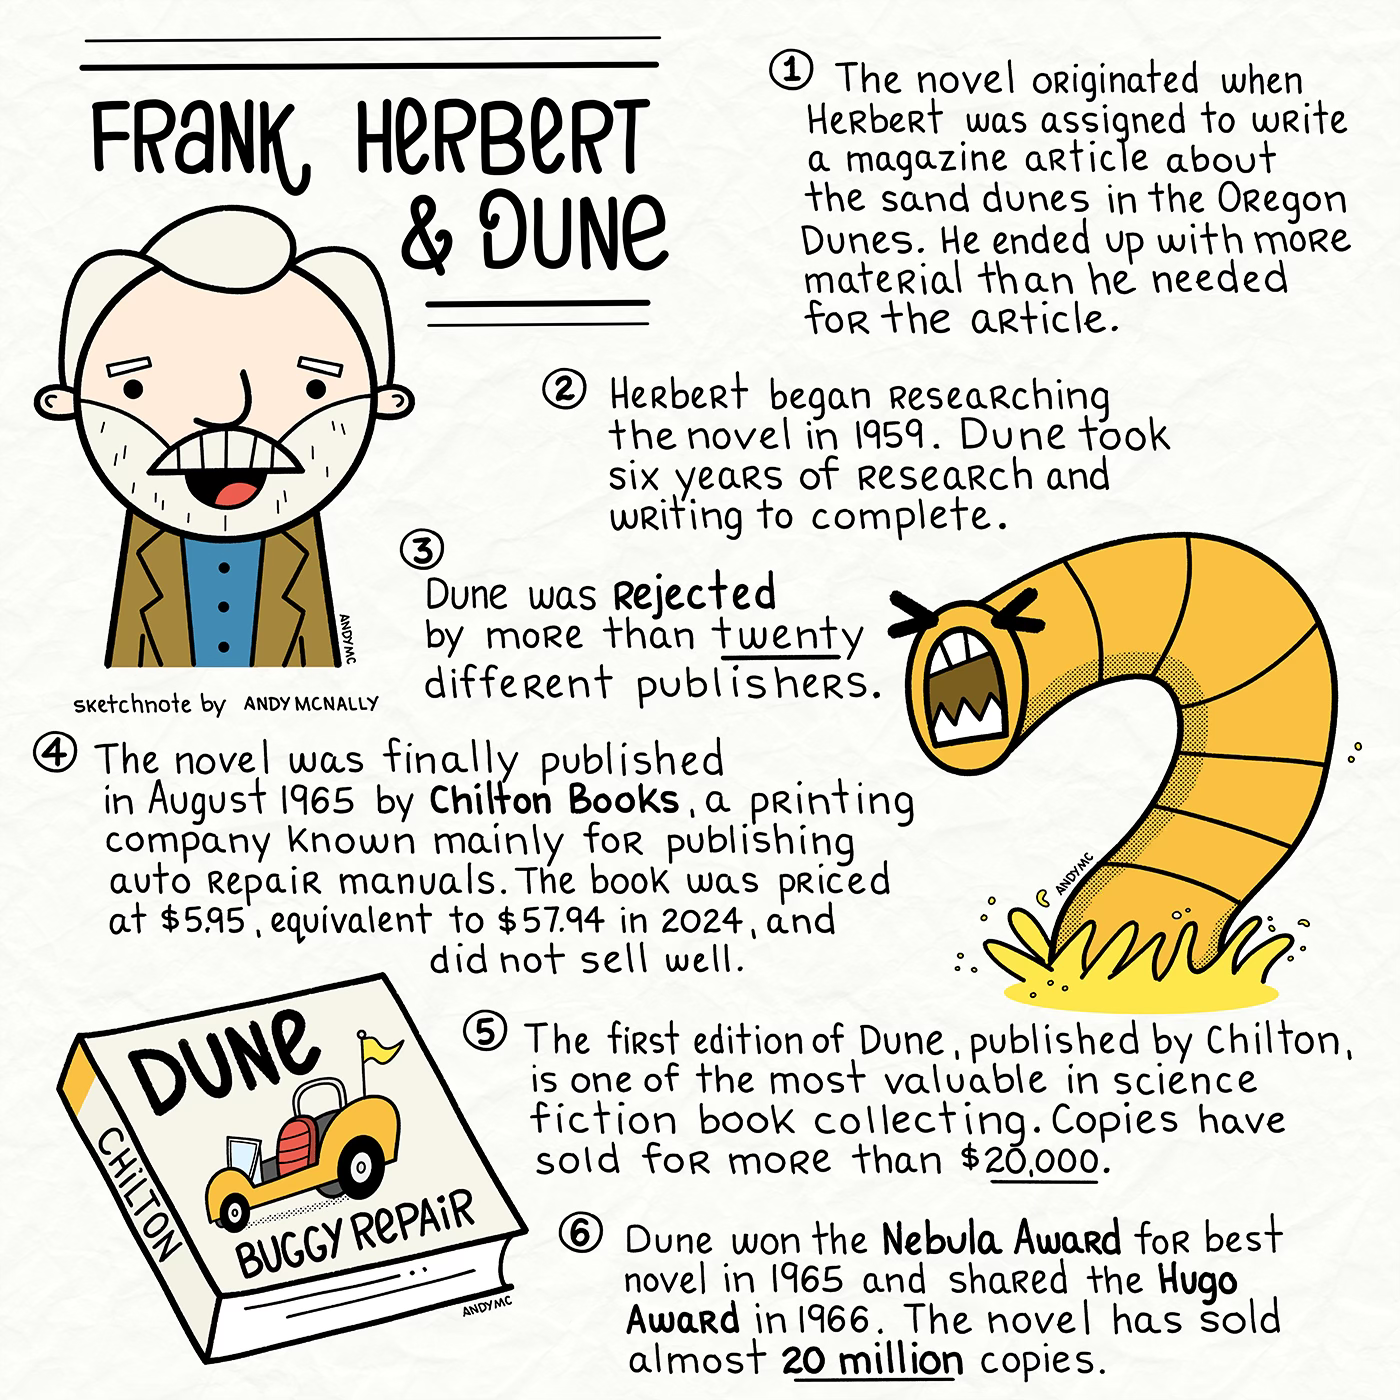 a sketchnote about Frank Herbert and his novel Dune